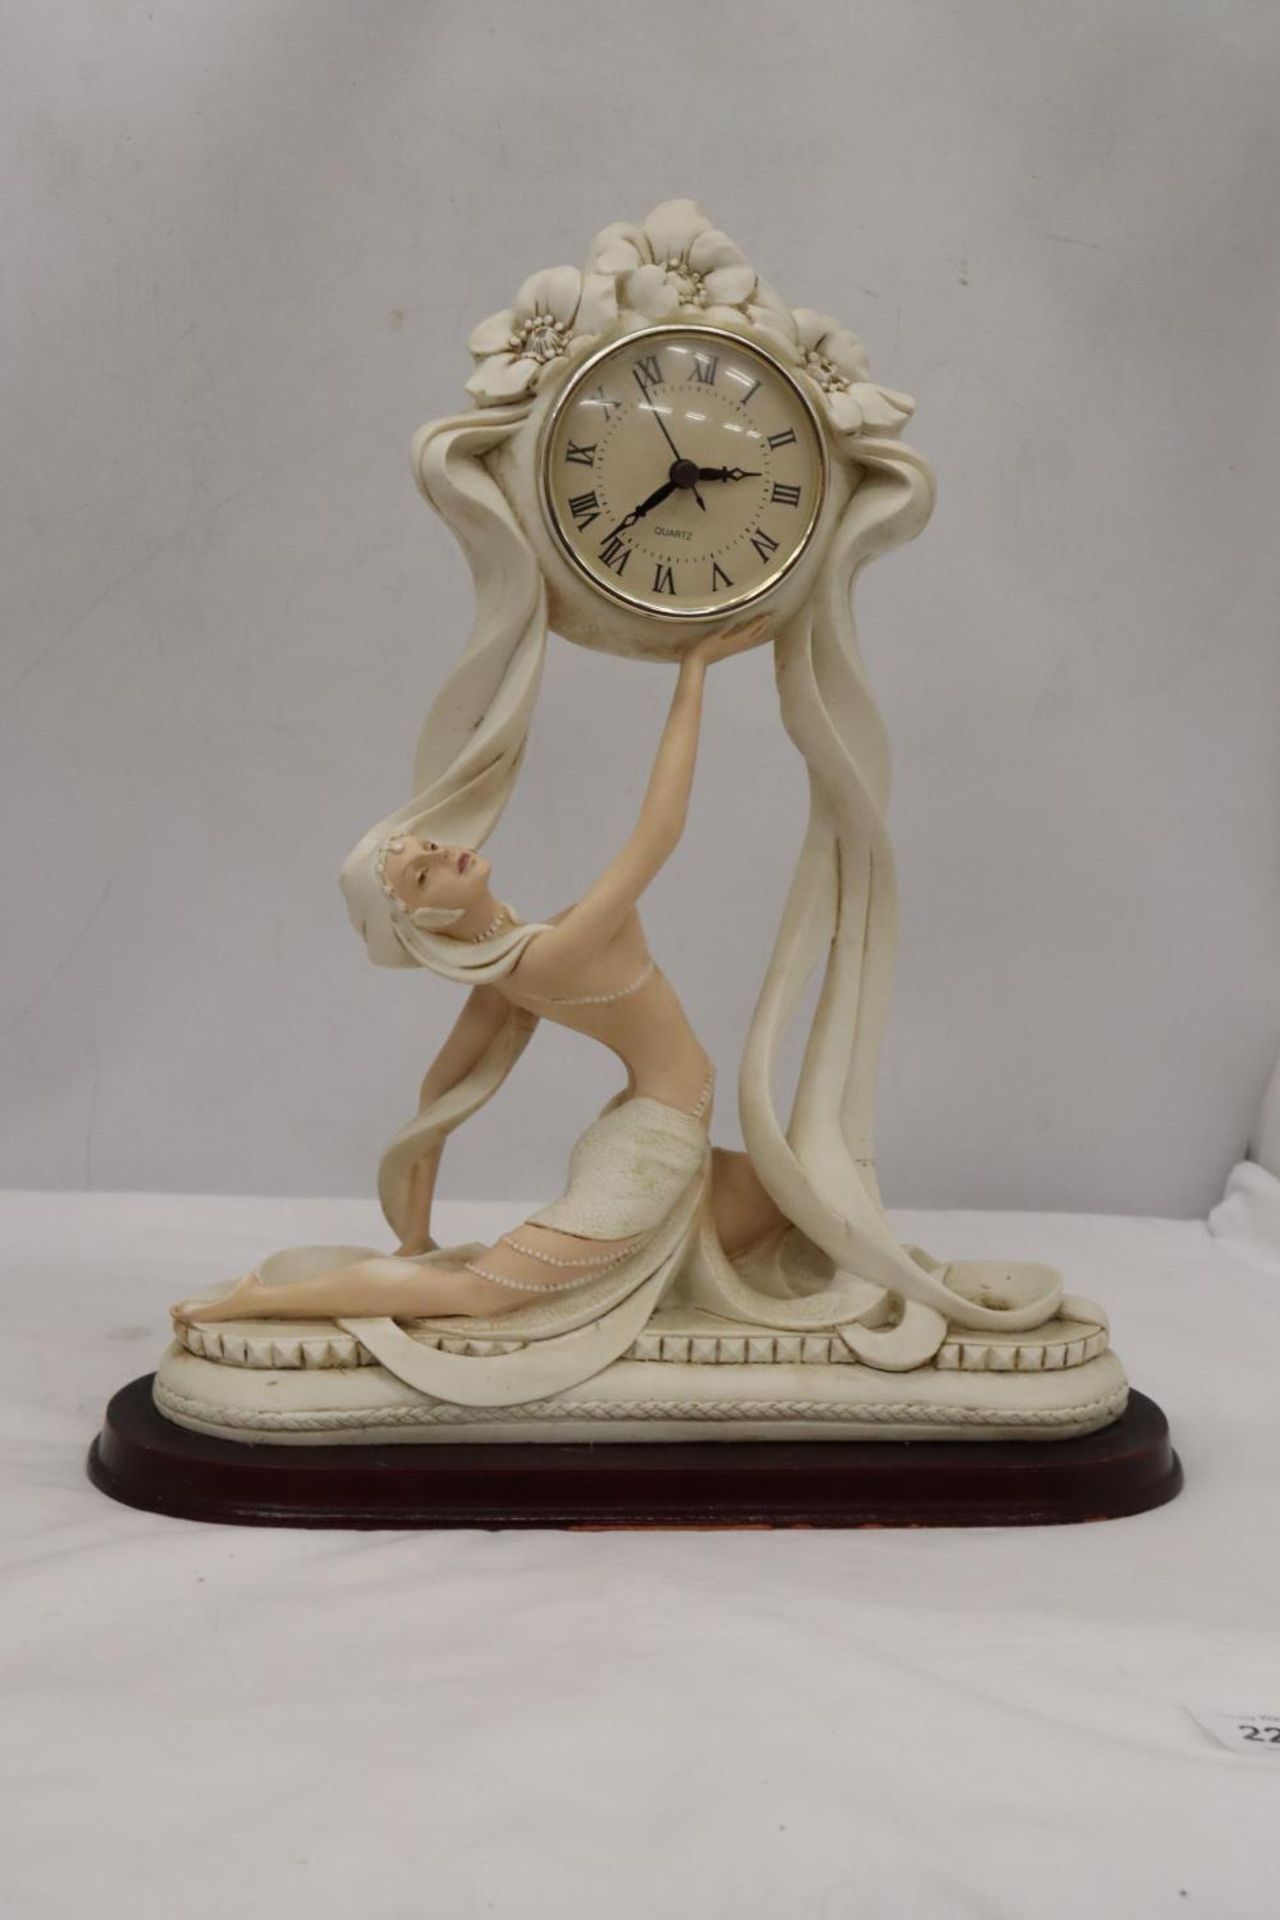 AN ART DECO STYLE MANTLE CLOCK WITH A LADY FIGURINE, HEIGHT 36CM